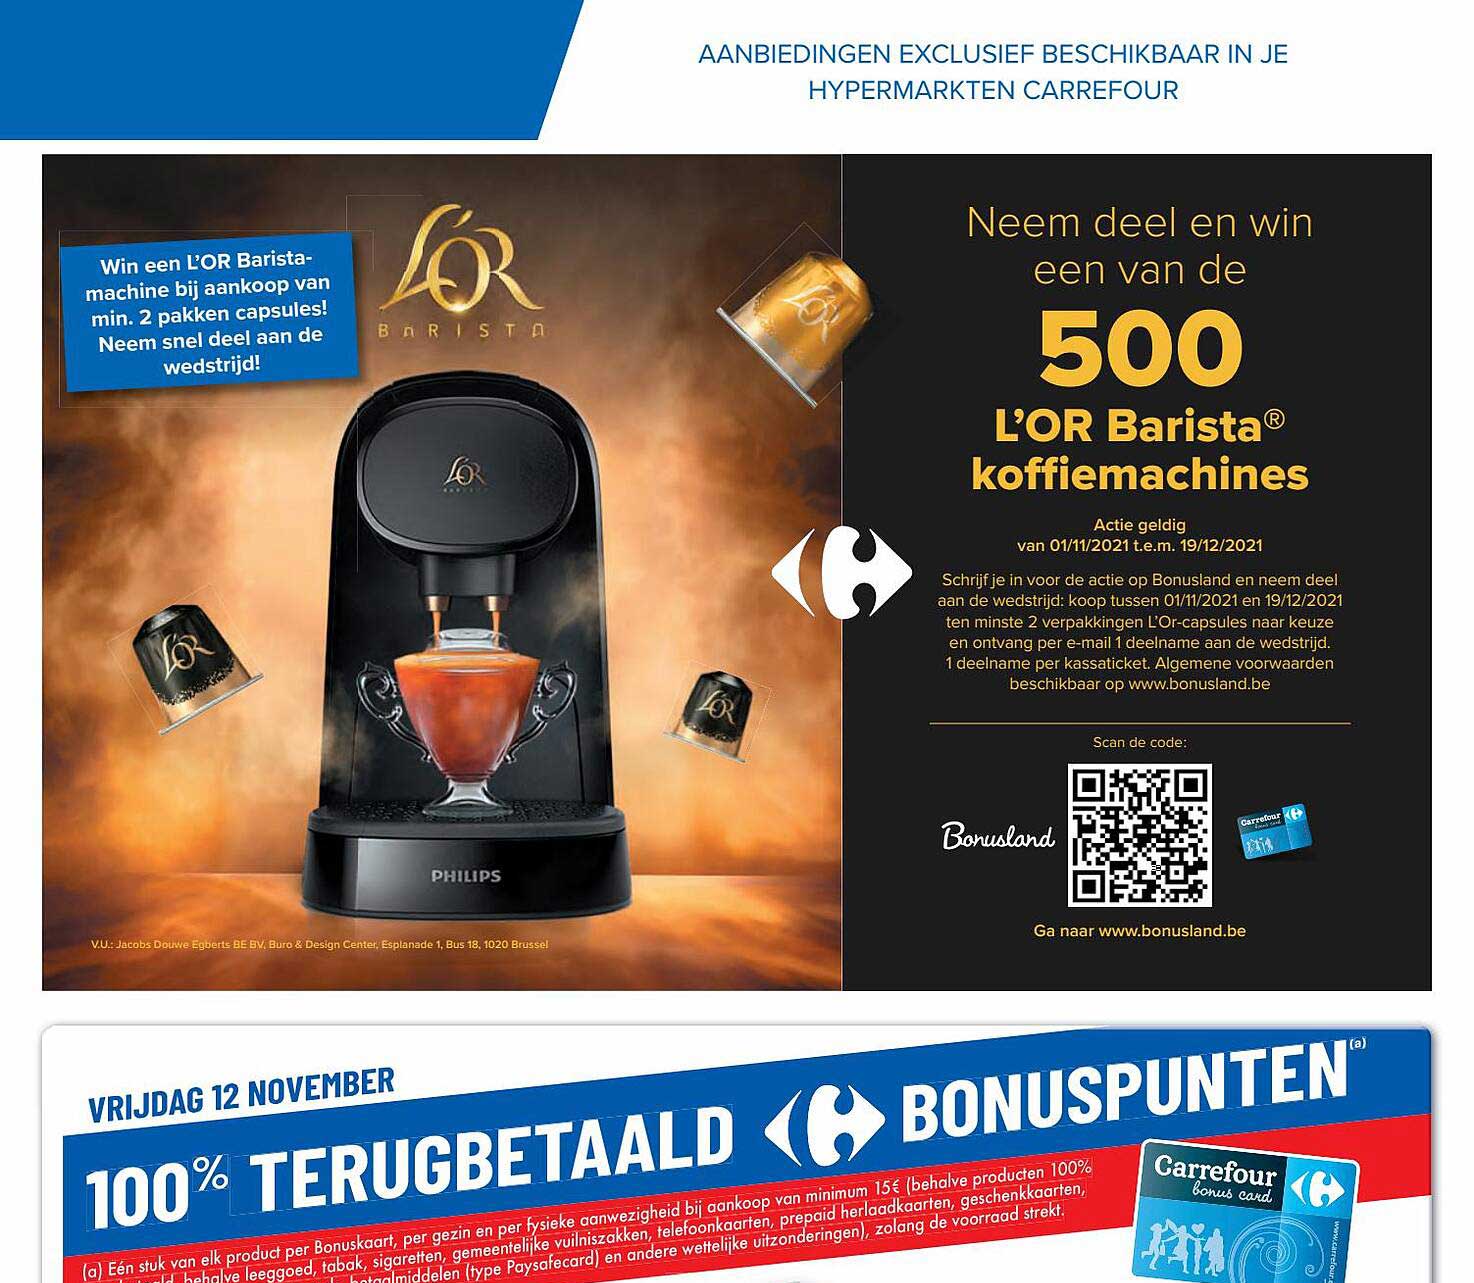 Hyper Carrefour L'or Barista® Koffiemachines